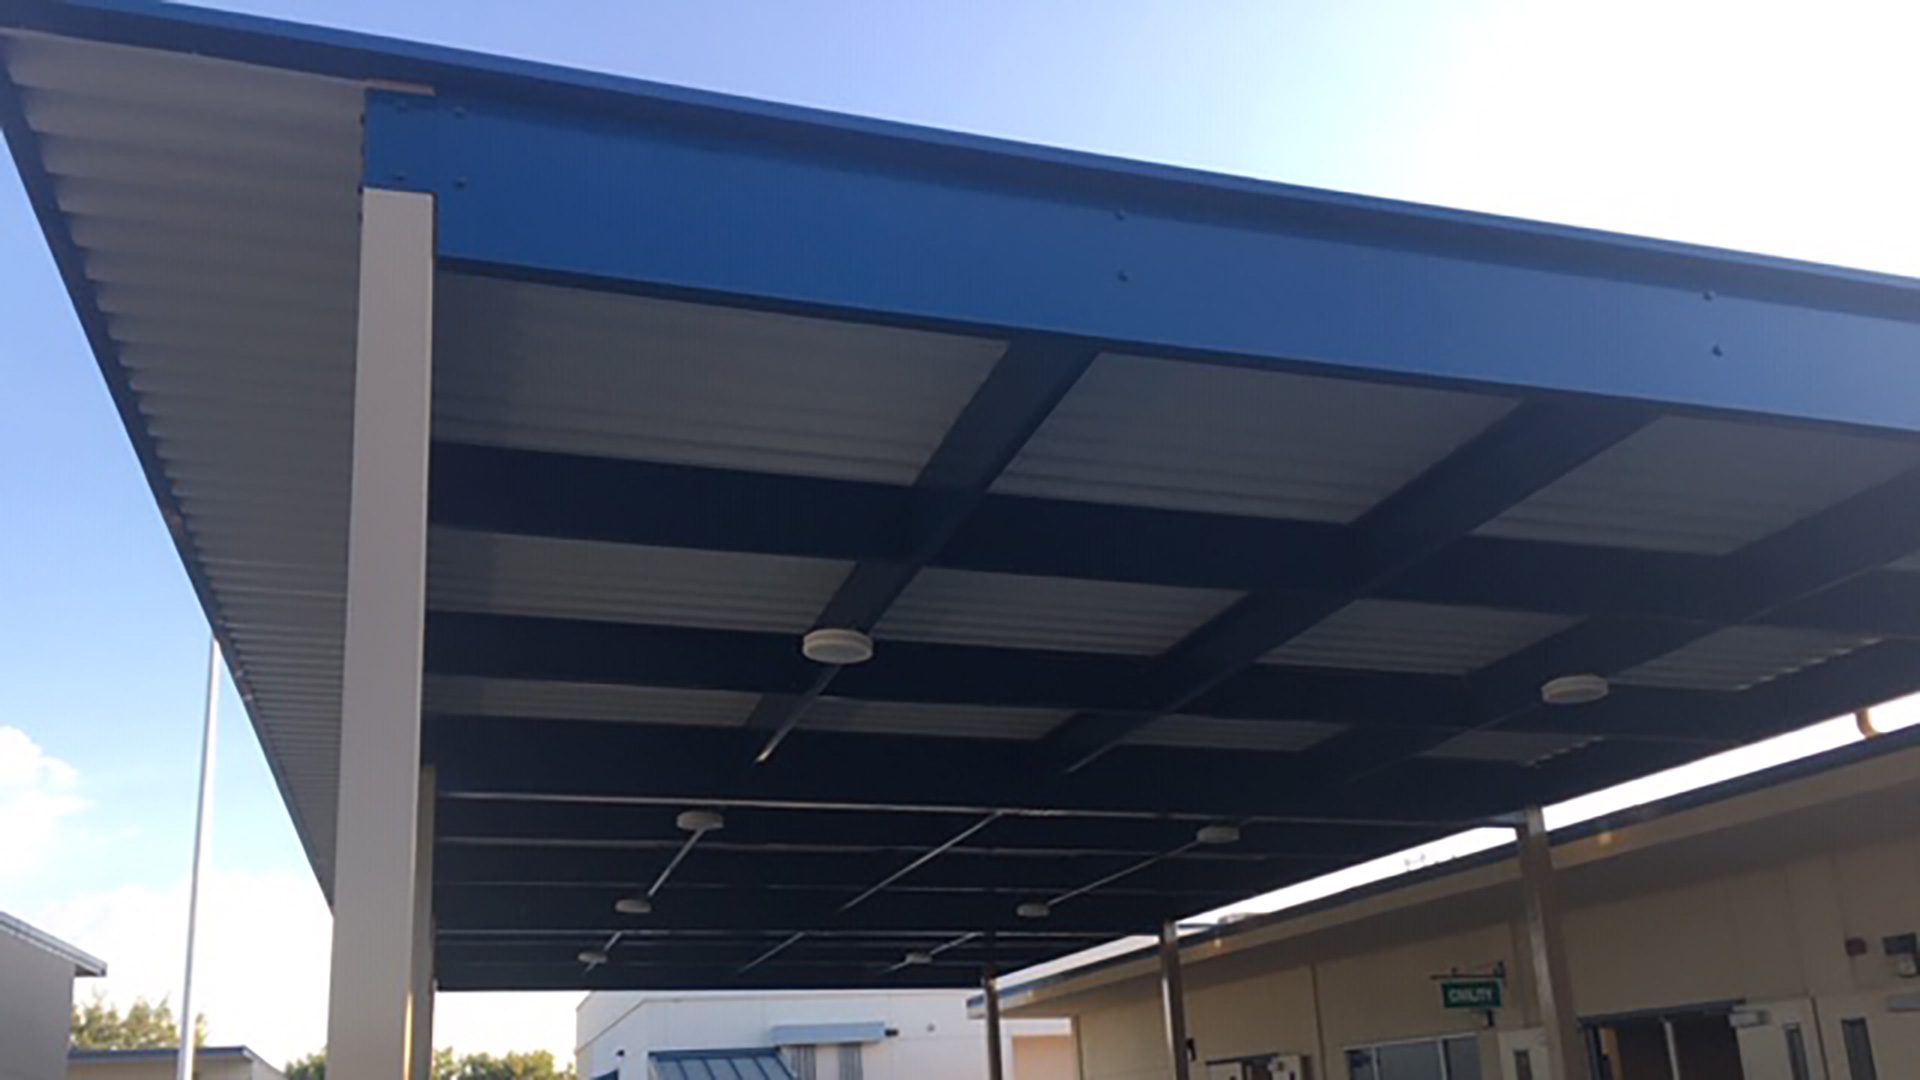 Large shade structure over concrete area between classrooms, with white posts and roof, and blue supports.